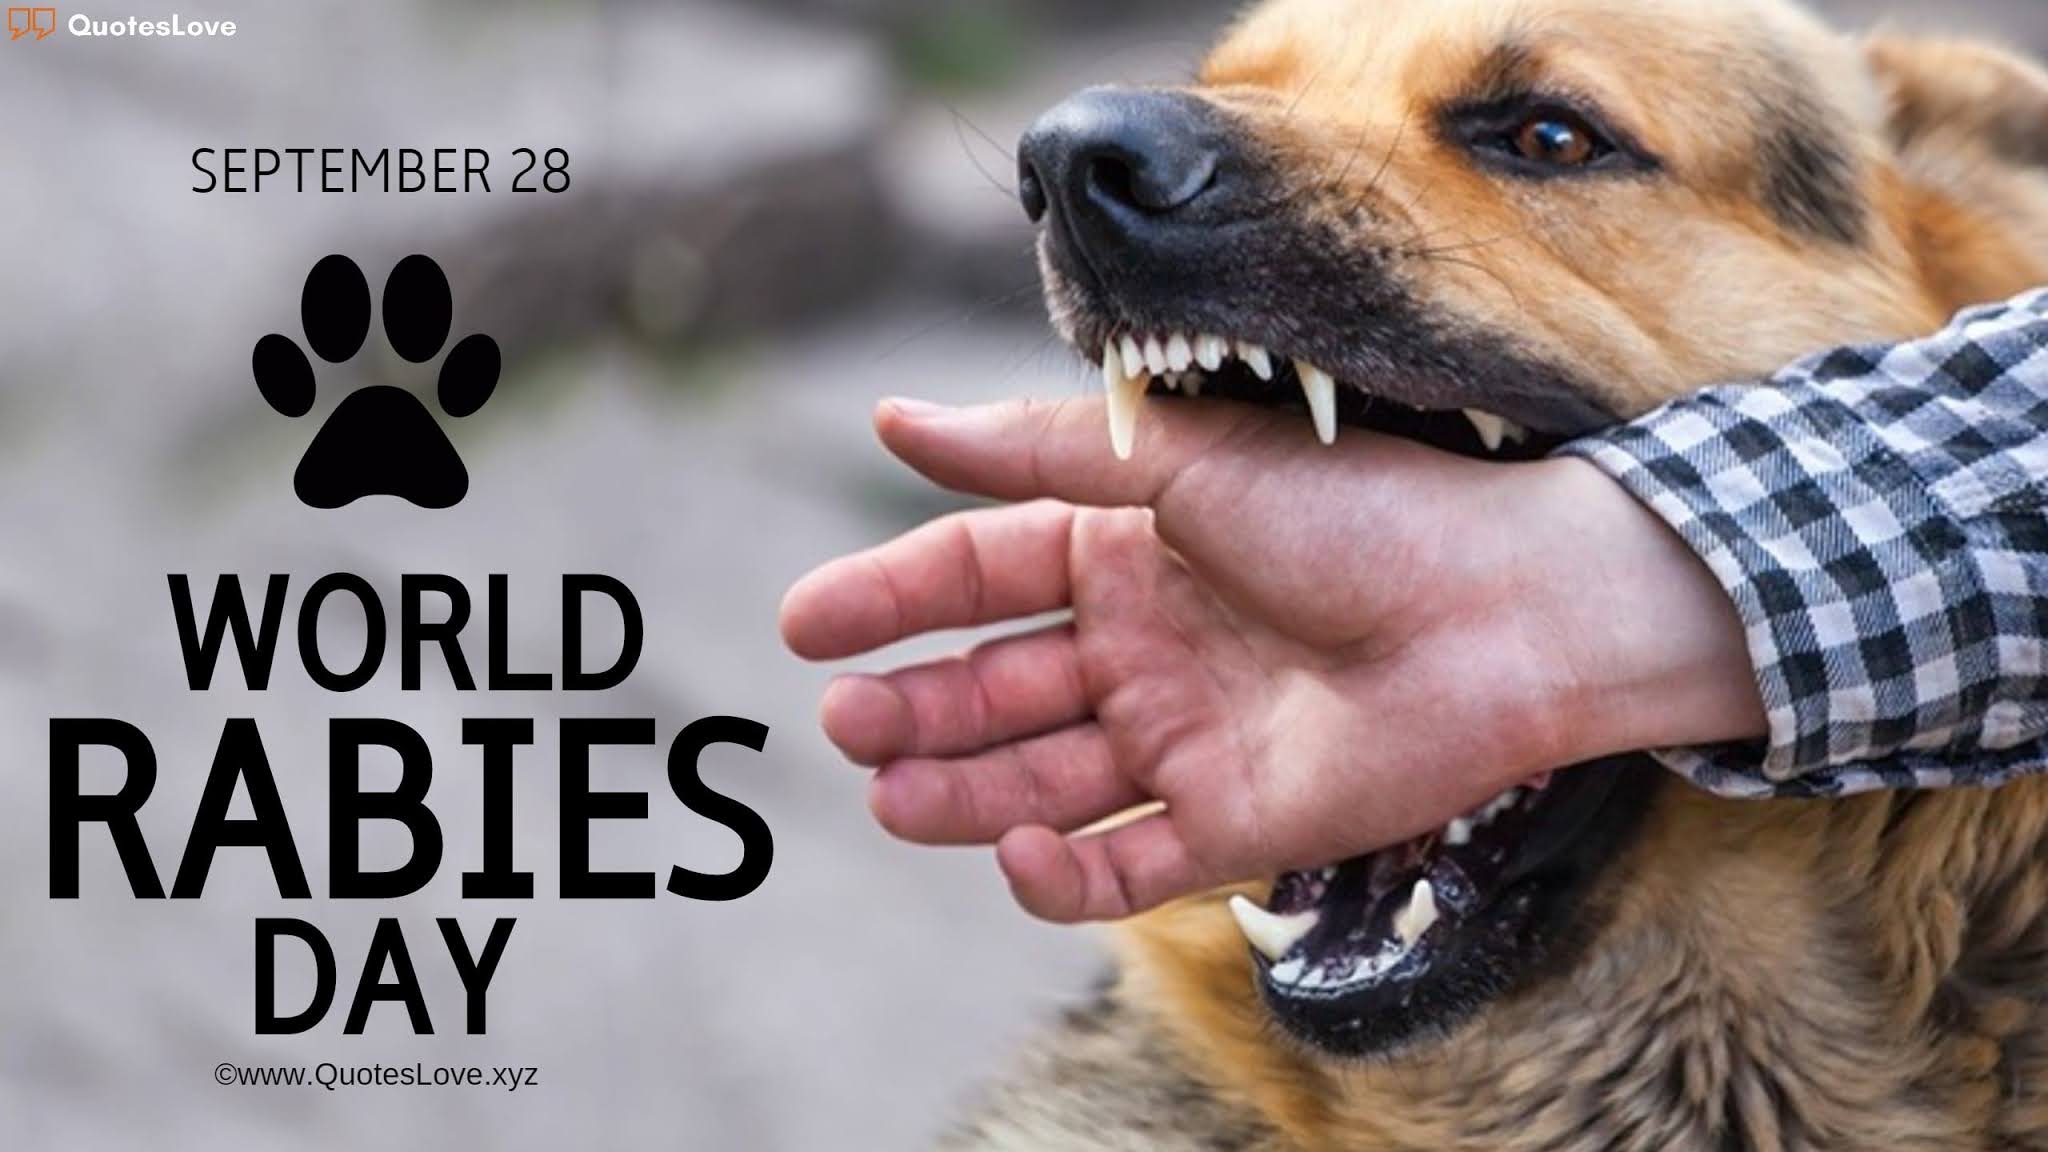 World Rabies Day Quotes, Sayings, Slogans, Wishes, Greetings, Theme, Poster, Pictures, Images, Photos